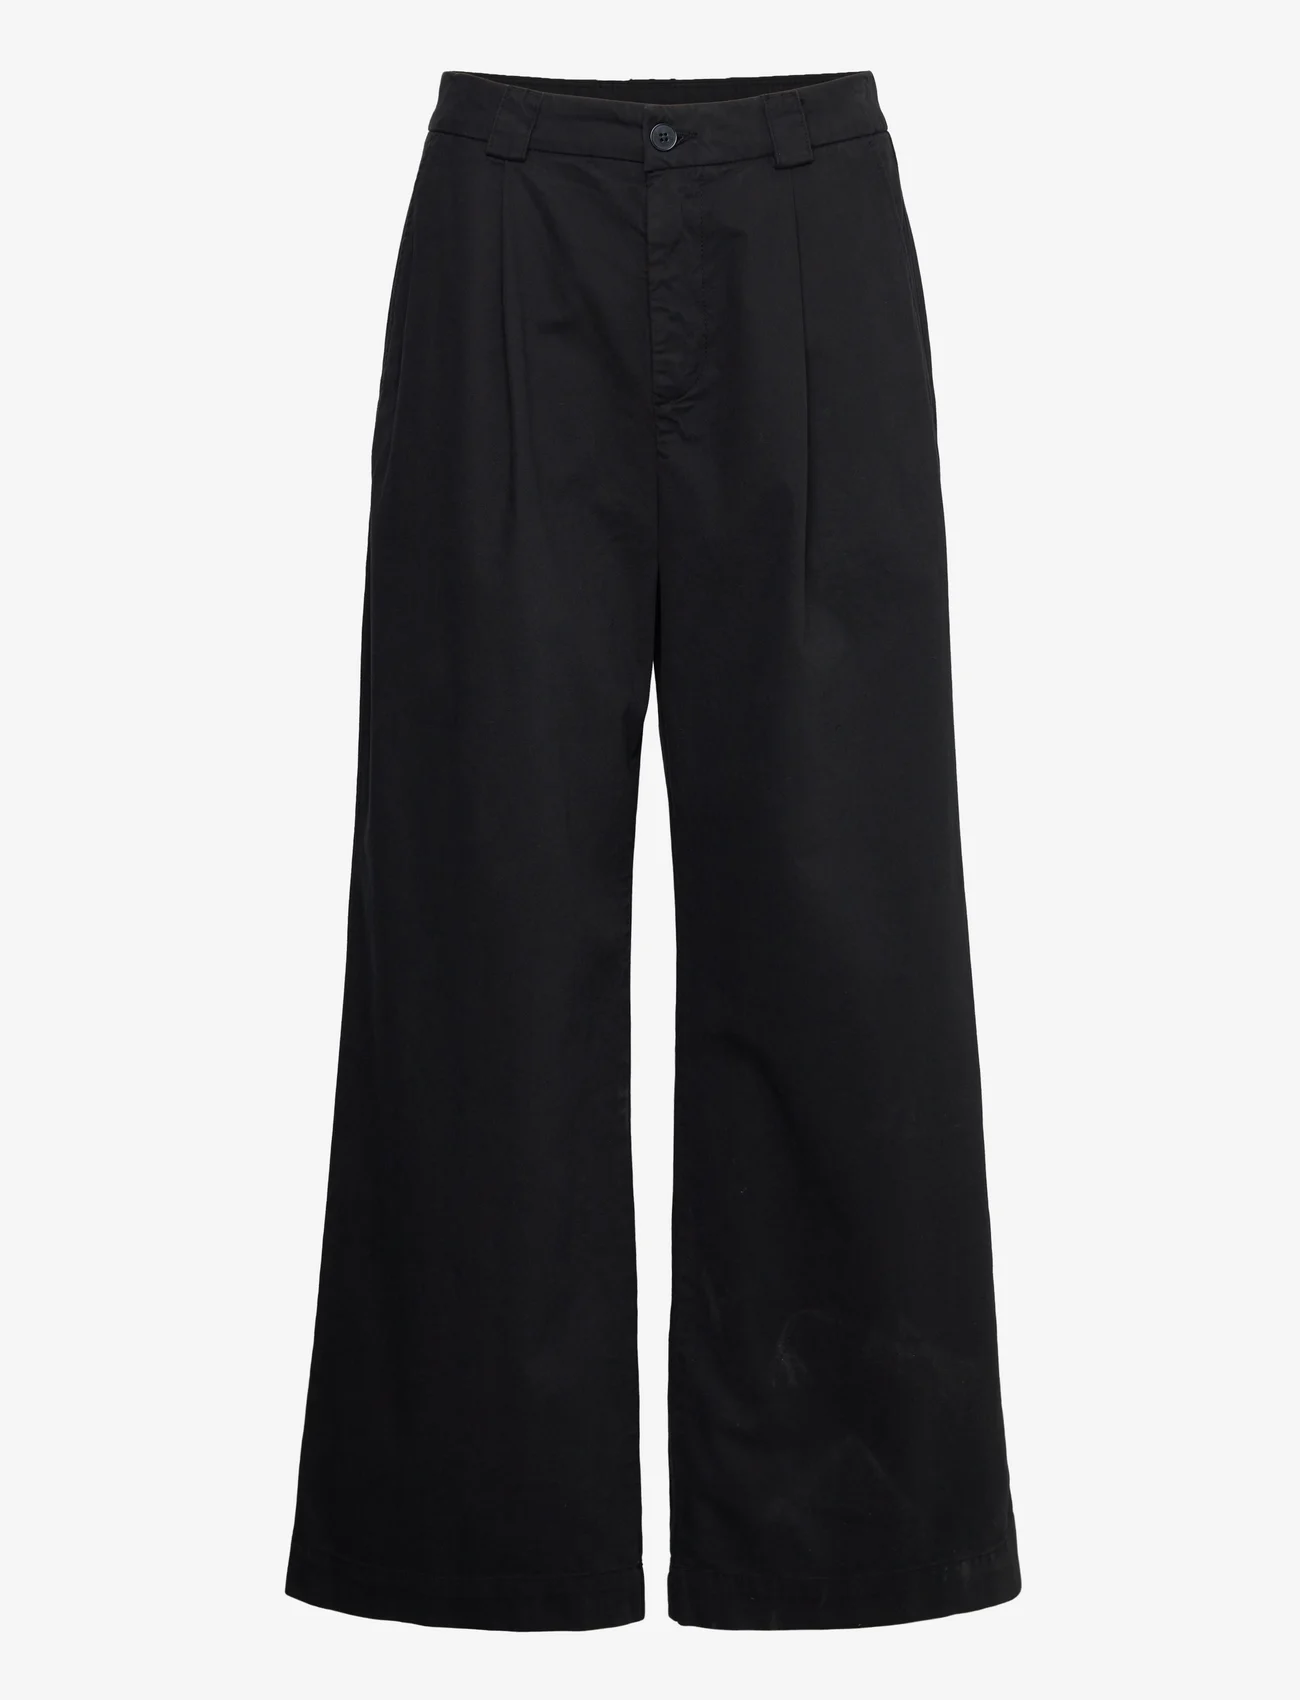 Hope - Relaxed Pleated Chinos - wide leg trousers - faded black chino - 0